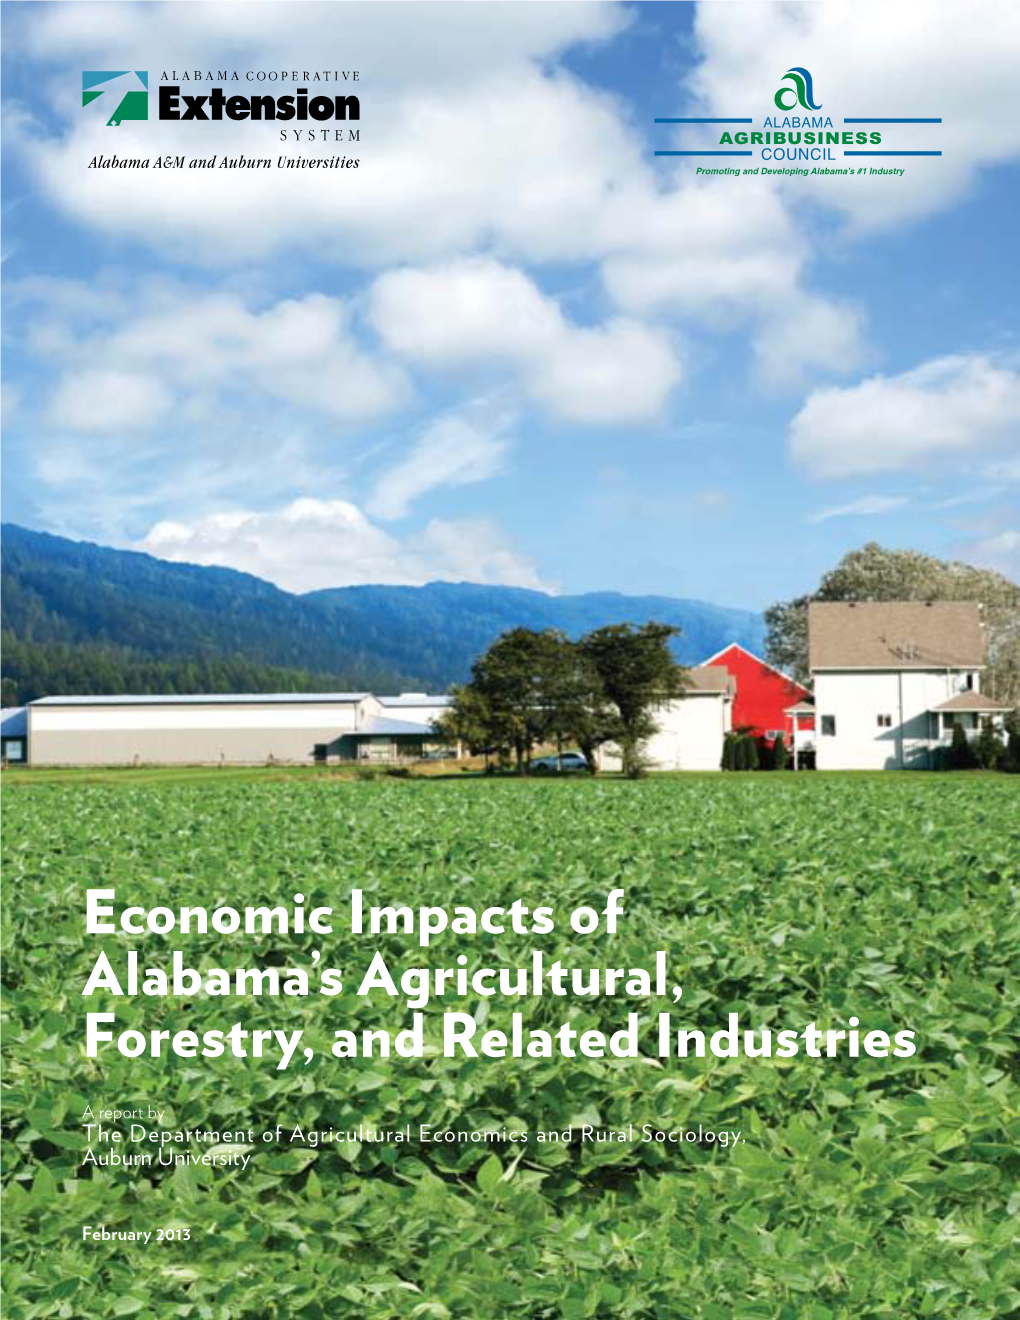 Economic Impacts of Alabama's Agricultural, Forestry, and Related